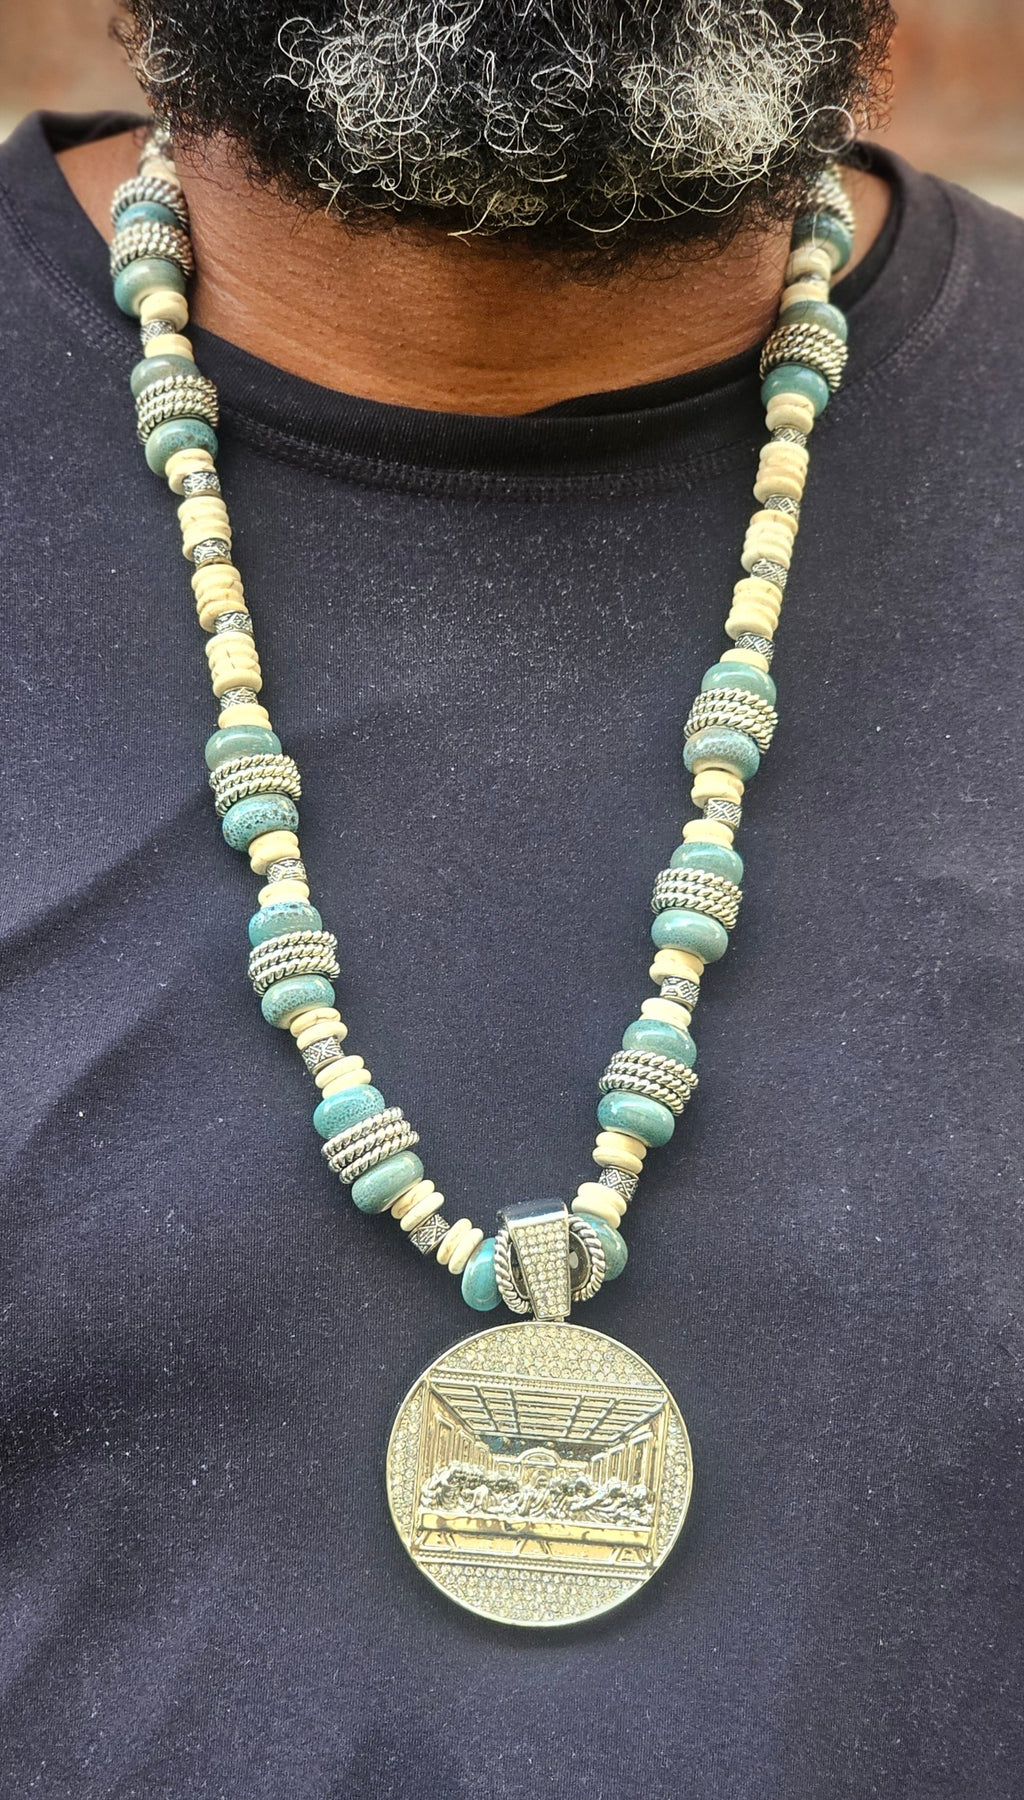 The Lord's Supper Beaded Necklace